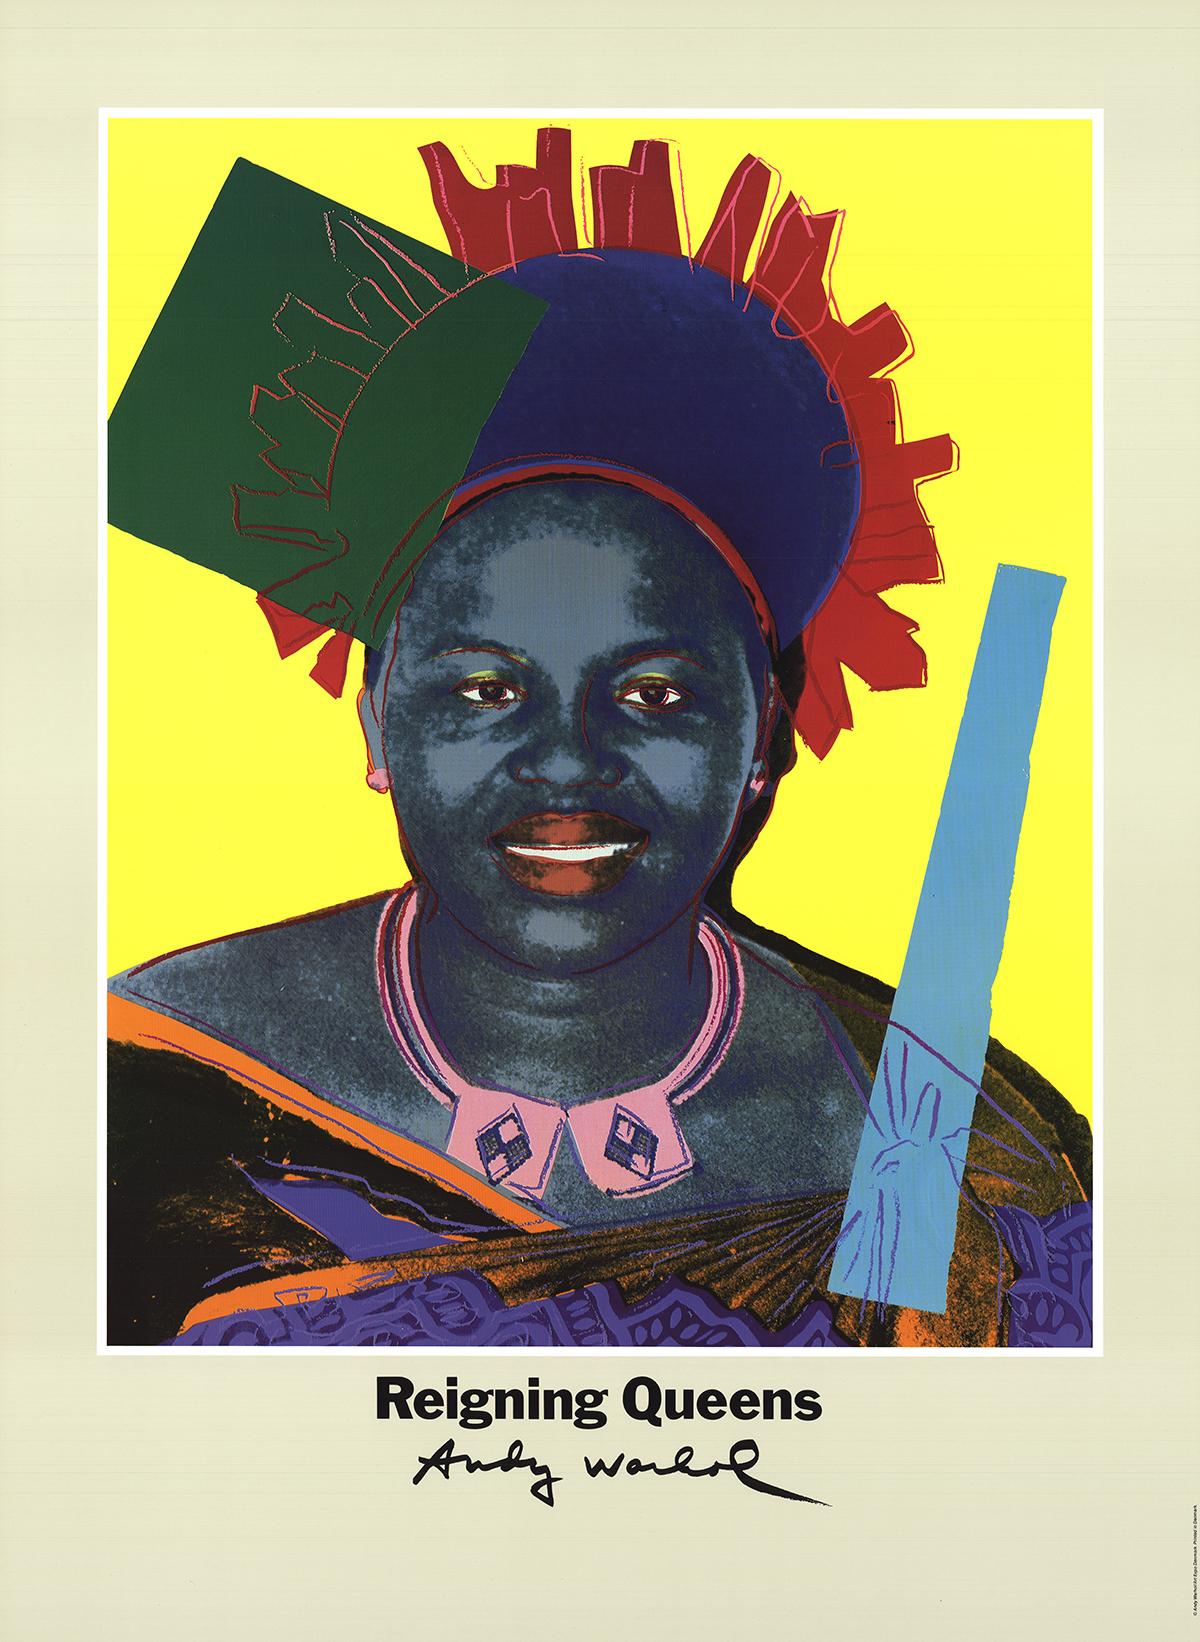 Queen Ntombi Twala Of Swaziland from Reigning Queens Exhibition Poster - Print by (after) Andy Warhol